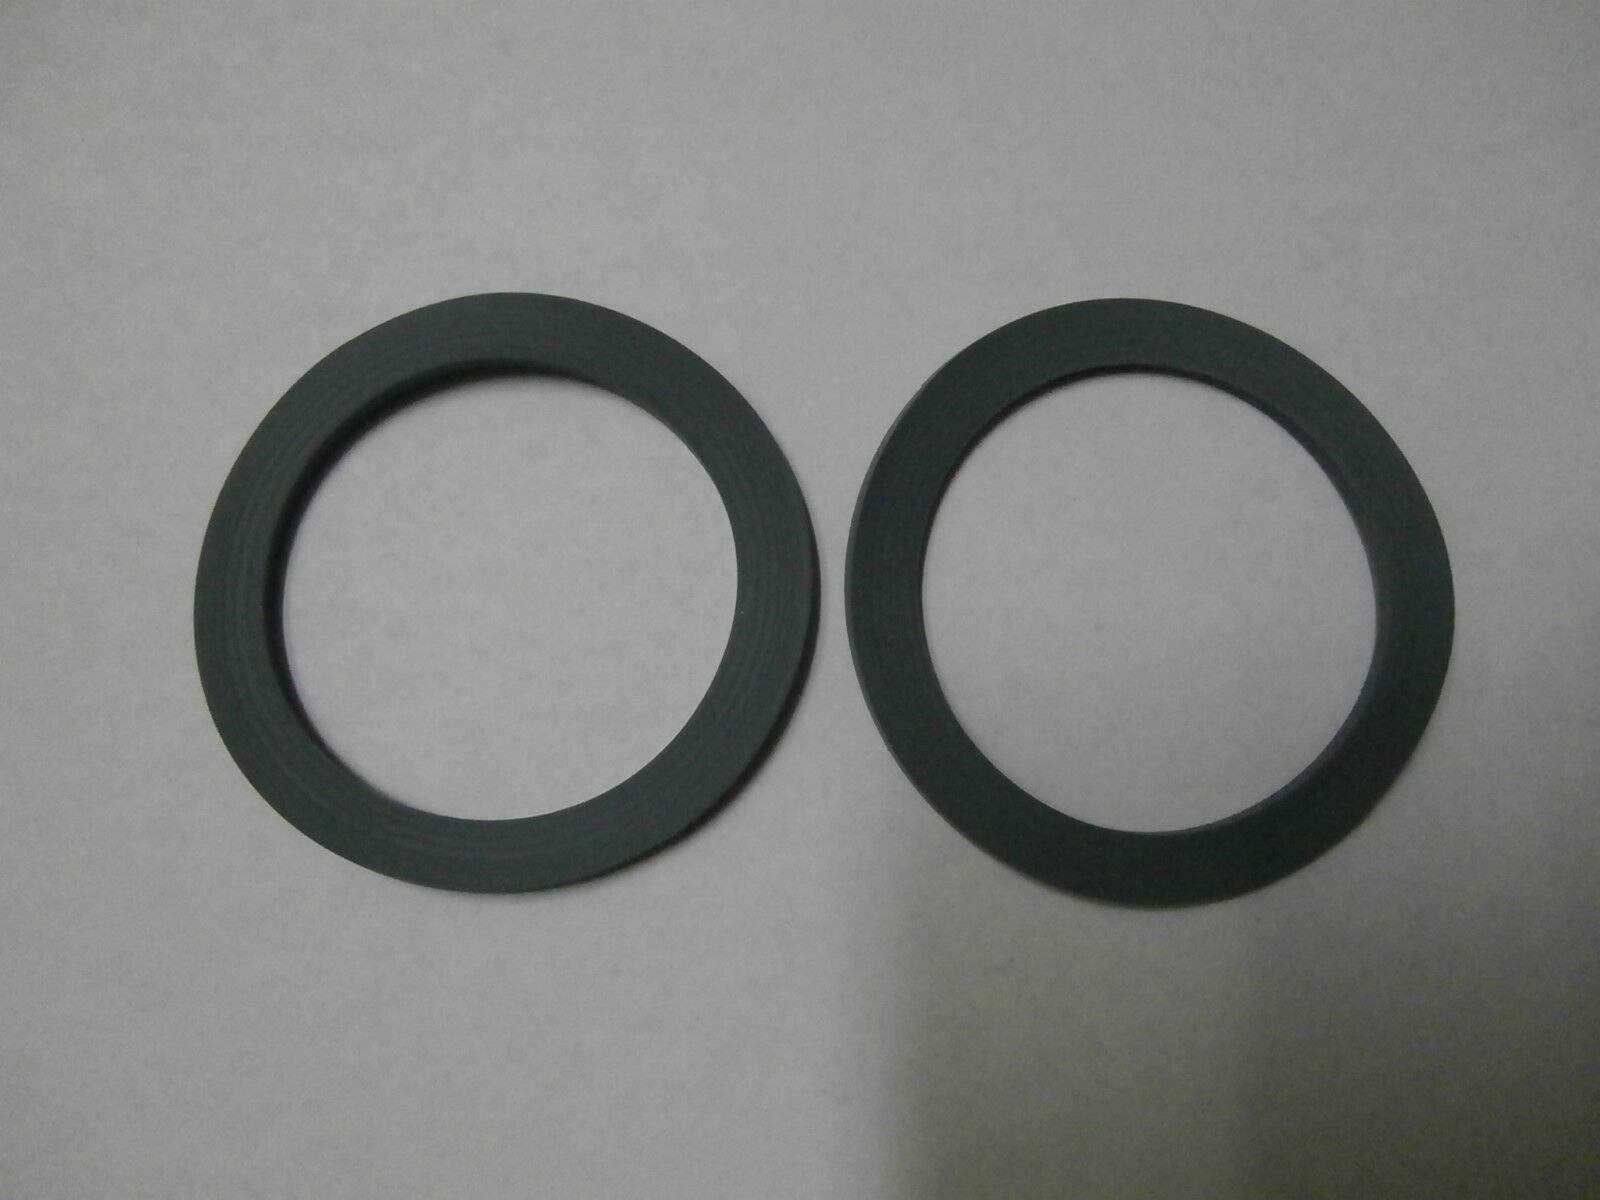 newpowergear 2 pack blender rubber sealing gasket o ring seal replacement for oster blender 4125, 4126, 4127, 4128, 4129-0, 4